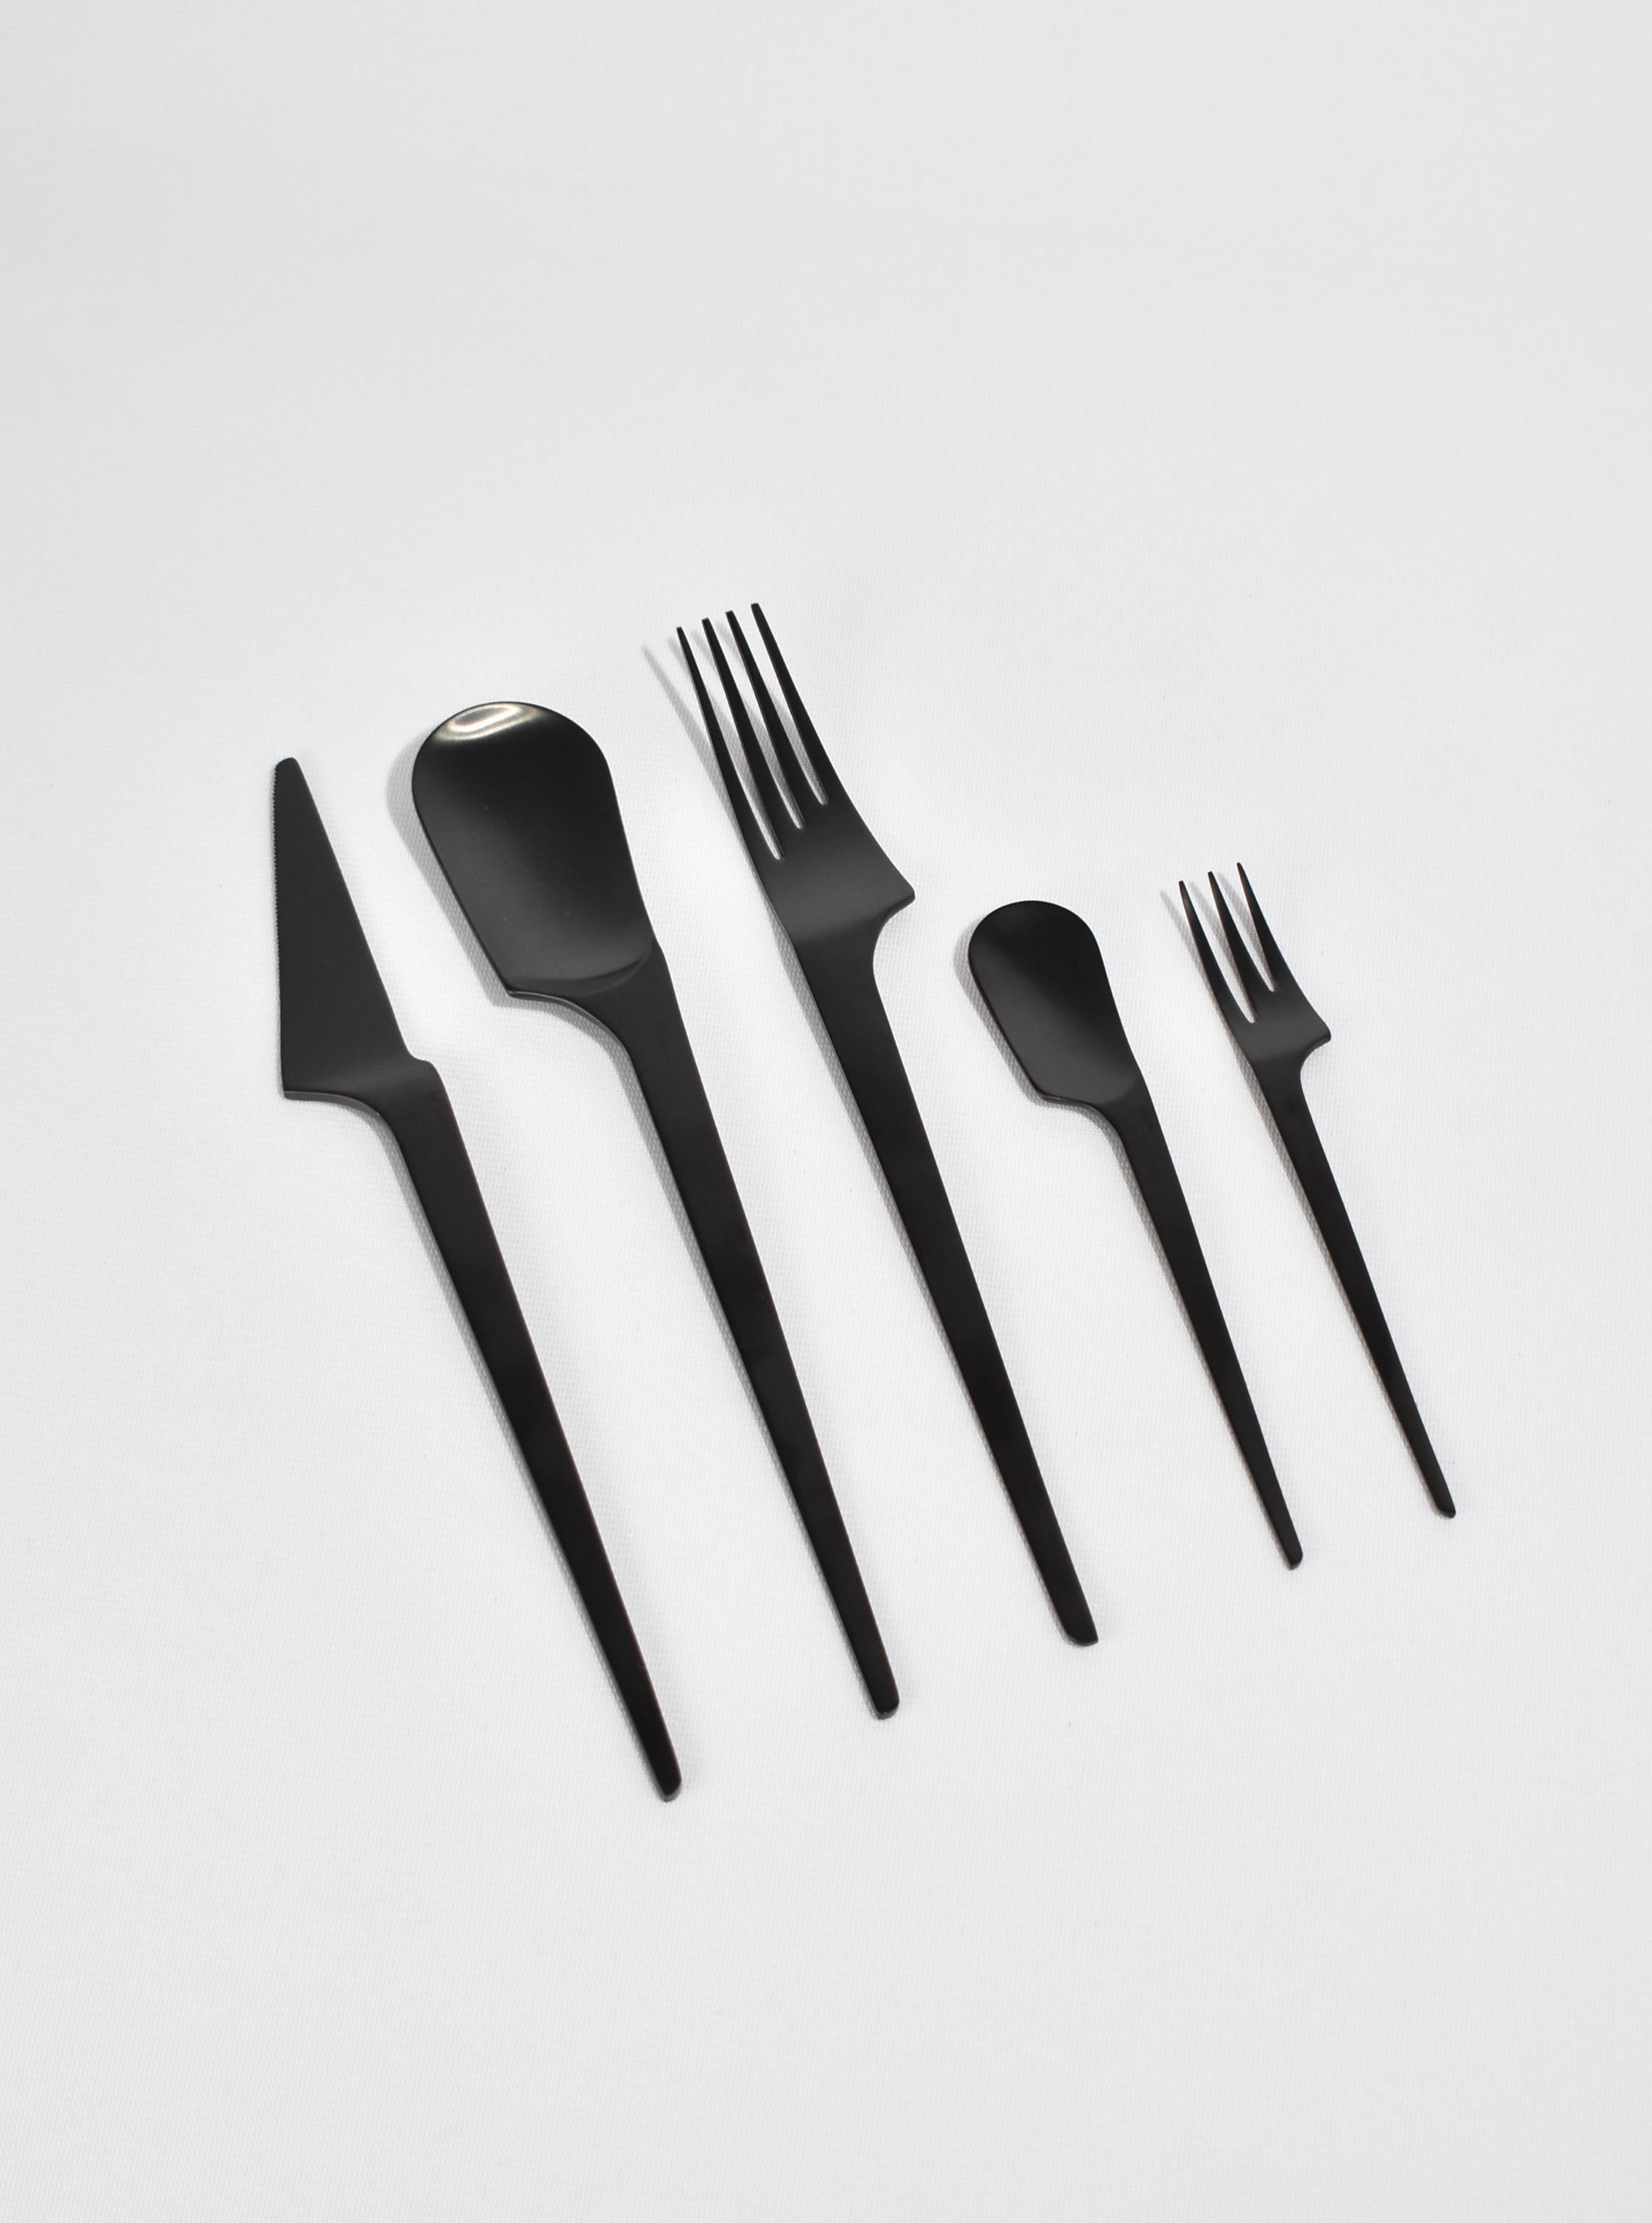 Flatware set of five pieces with a modernist sculptural shape in black coated brushed stainless steel. By Herdmar, made in Portugal. 

Purchase includes one set of five pieces (one knife, two forks, two spoons). Ten sets available.

Care: